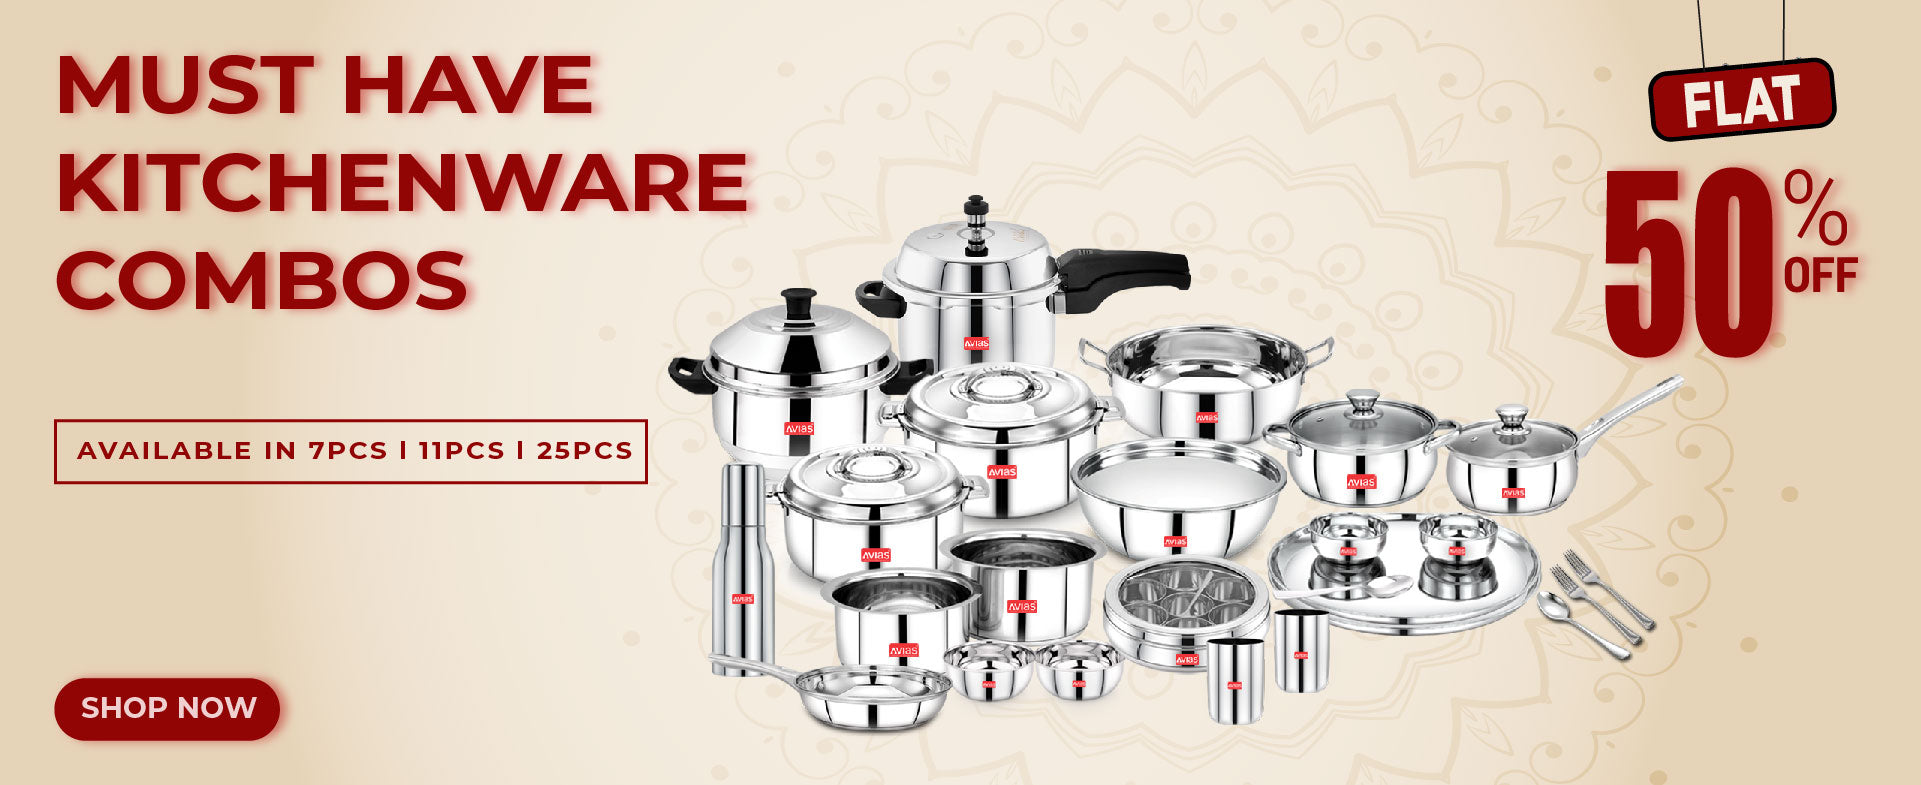 Avias stainless steel kitchen combo set/ cookware combo set at 50% offer